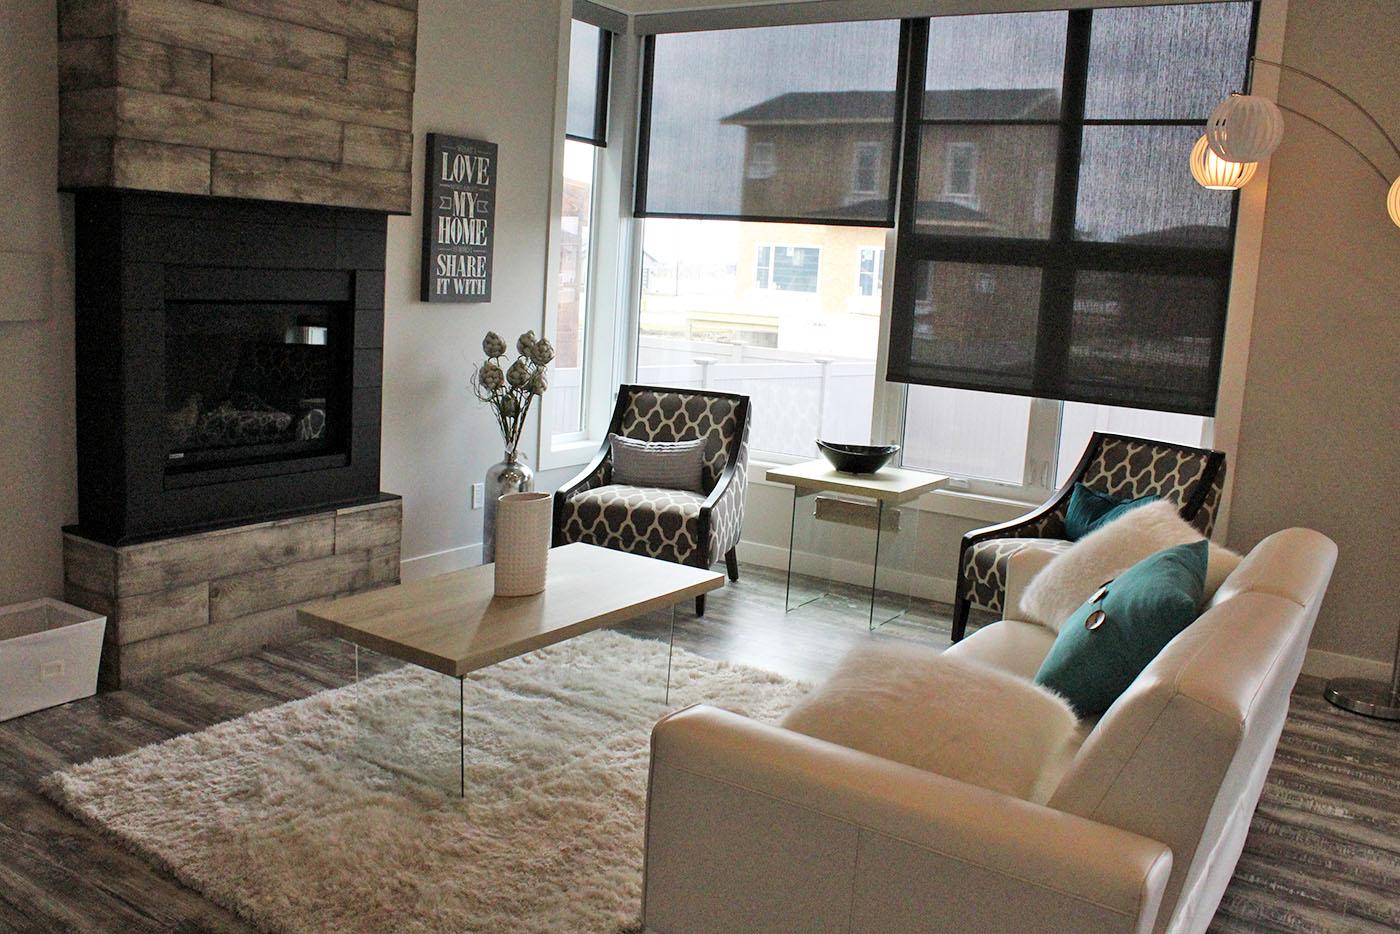 UNWIND - A modern style upstairs living room is one of the many features of this Mason Martin Homes on Lindman Avenue.